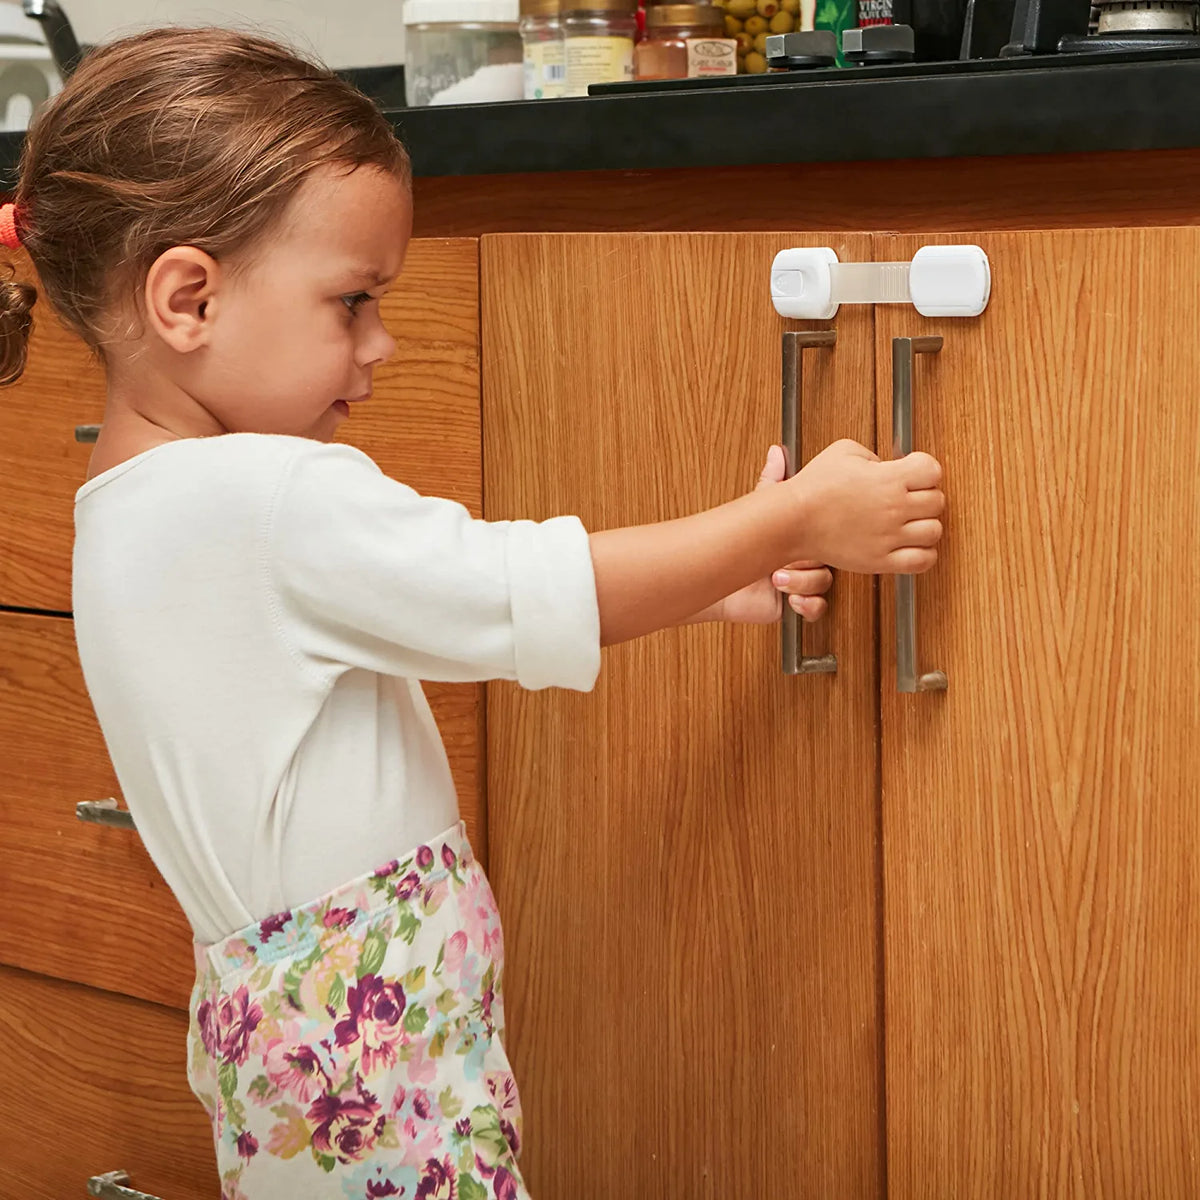 New Version Child Safety Locks 4-Pack. Baby Proof Cabinets, Drawers with Easy Adjustable Strap Length, Double Lock Option, Easier Latch for Adults to